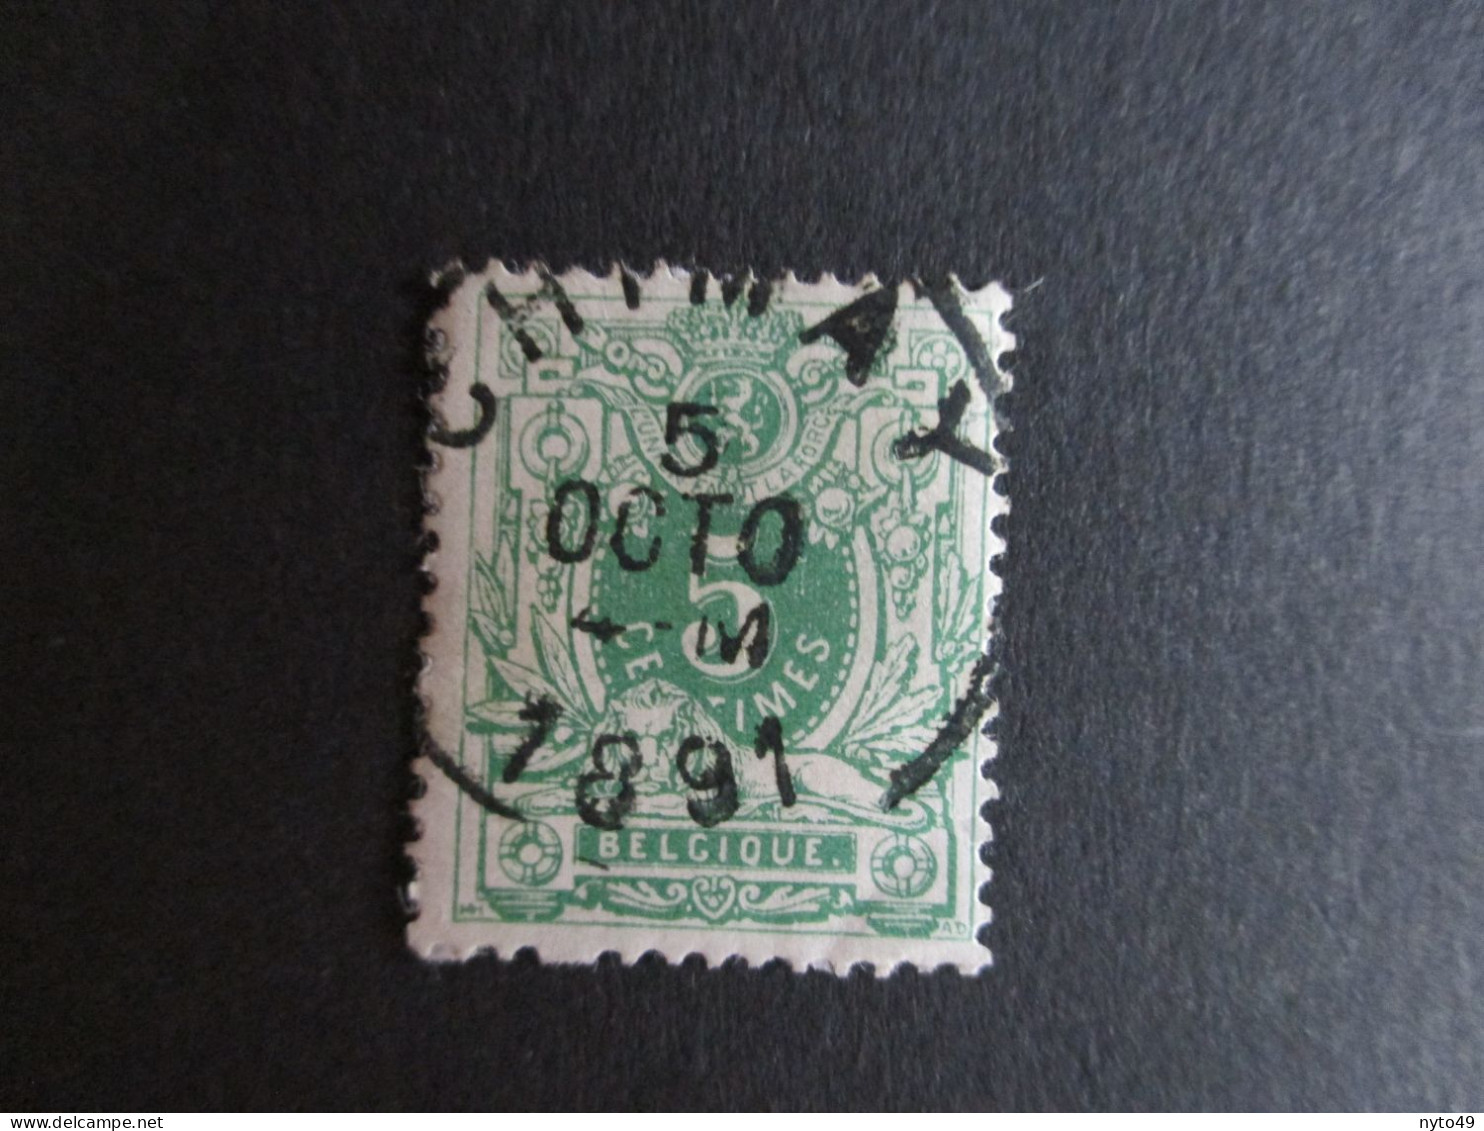 Nr 45 - Centrale Stempel "Chimay" - Coba + 2 - 1869-1888 Lying Lion